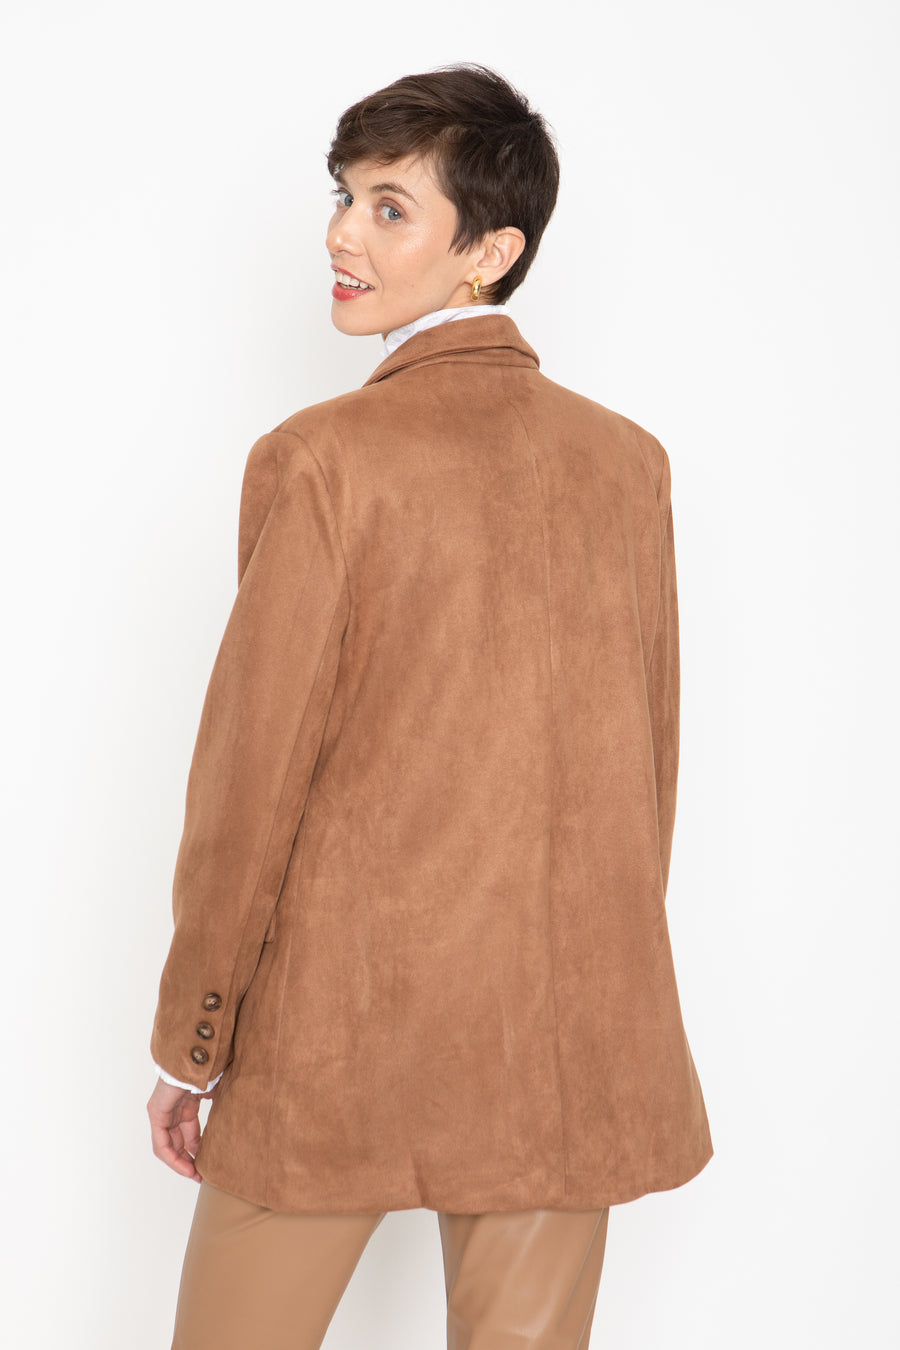 No Srcipt image - Images of 4 of 7 faux suede jacket, Emory vegan suede jacket, oversized jacket, double breasted, light brown color